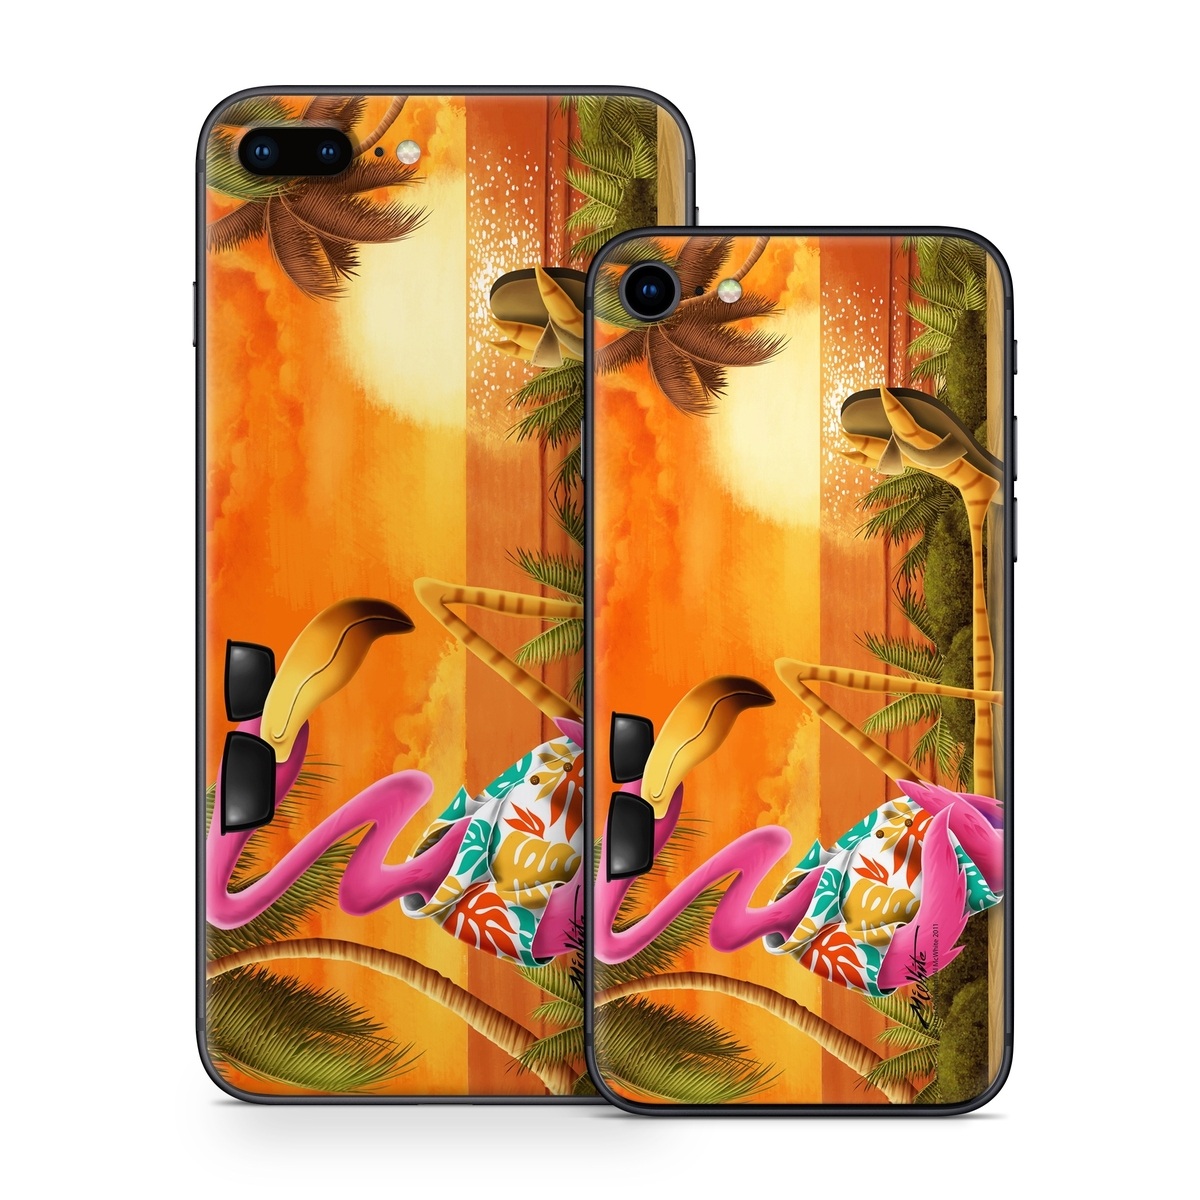 iPhone 8 Series Skin design of Cartoon, Art, Animation, Illustration, Plant, Cg artwork, Shoe, Fictional character, with red, orange, green, black, pink colors